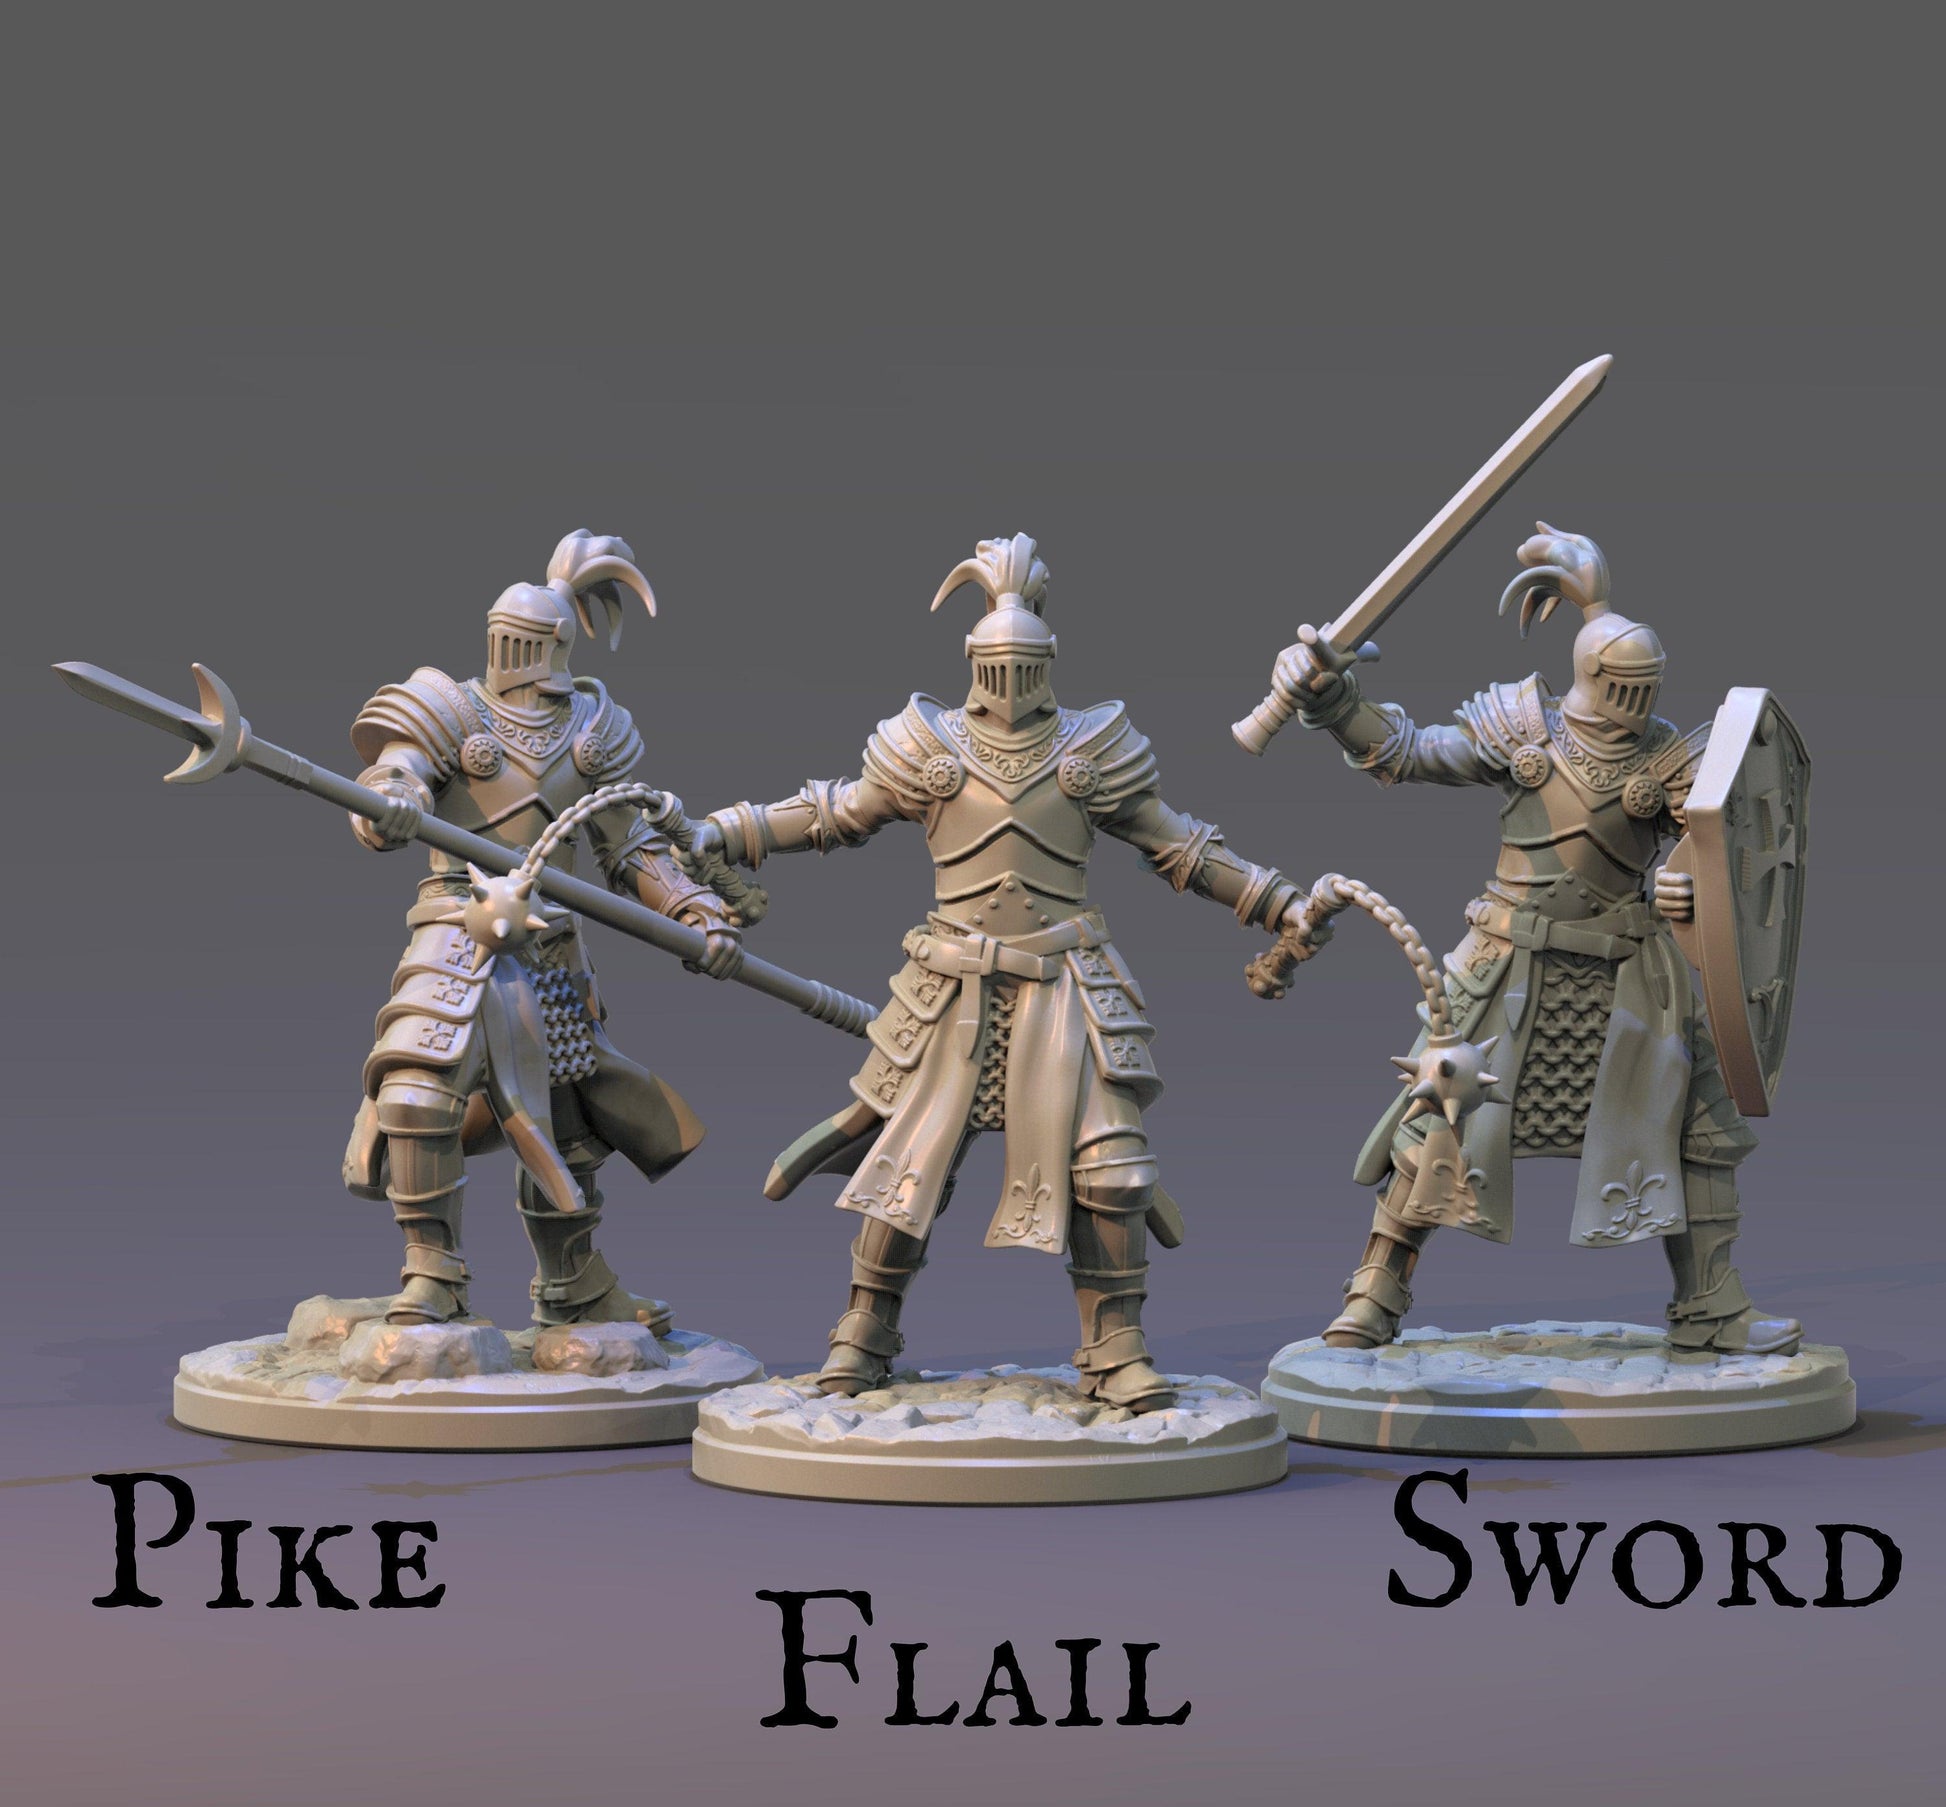 Knight miniatures | Clay Cyanide | 32mm Scale | Tabletop | Legend of King Arthur | DnD Miniature | Dungeons and Dragons,DnD 5e - Plague Miniatures shop for DnD Miniatures